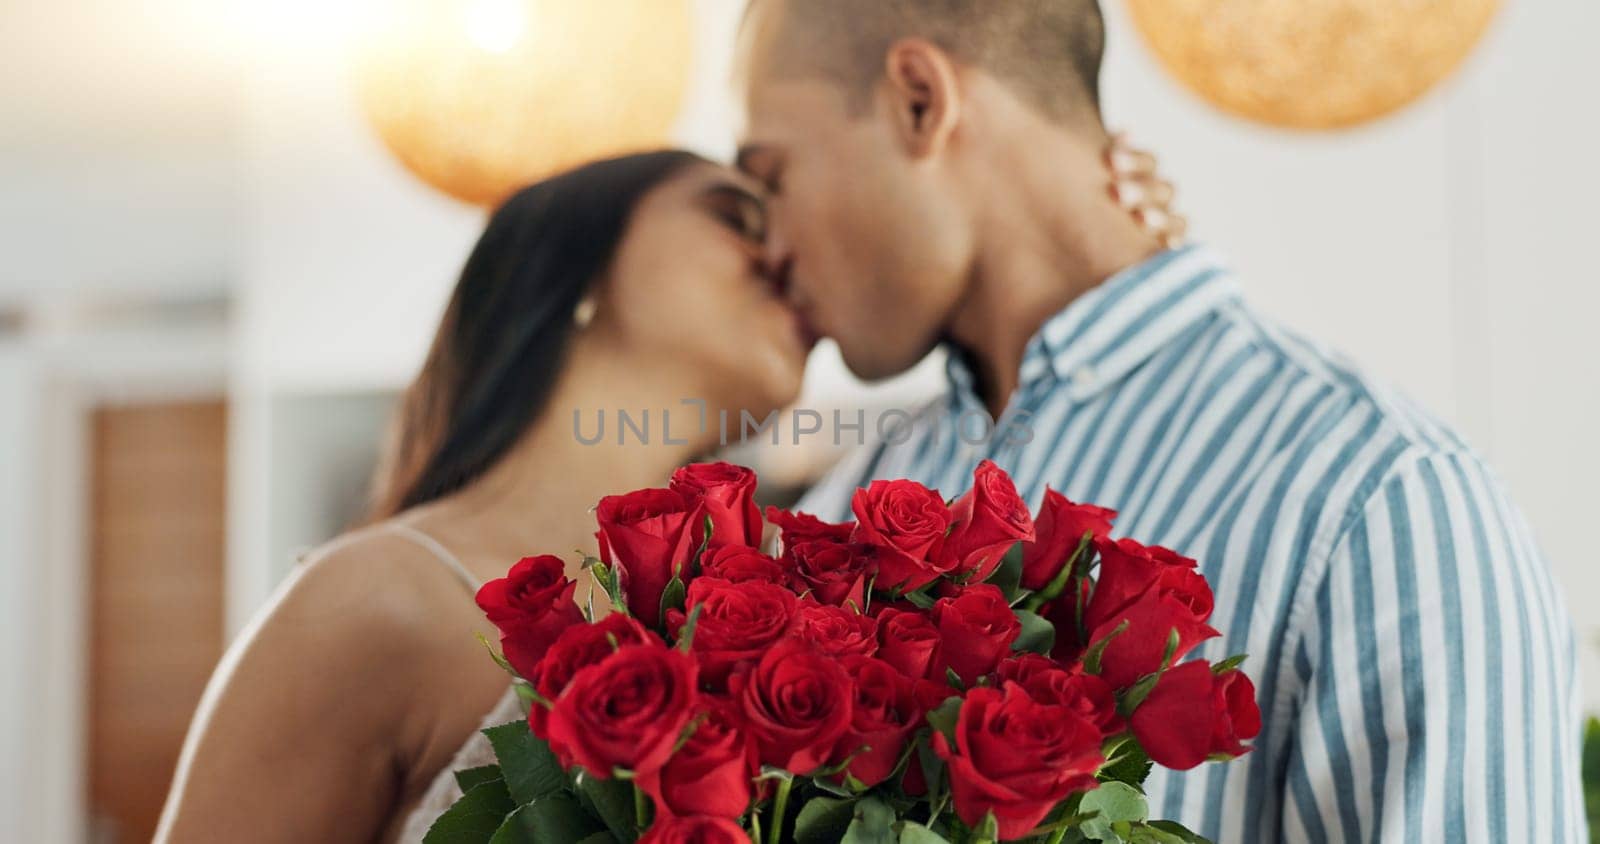 Couple, flowers and kiss for anniversary celebration, marriage and loyalty or commitment to love. People, happy and romance for relationship milestone, bonding and plant gift for support at home.